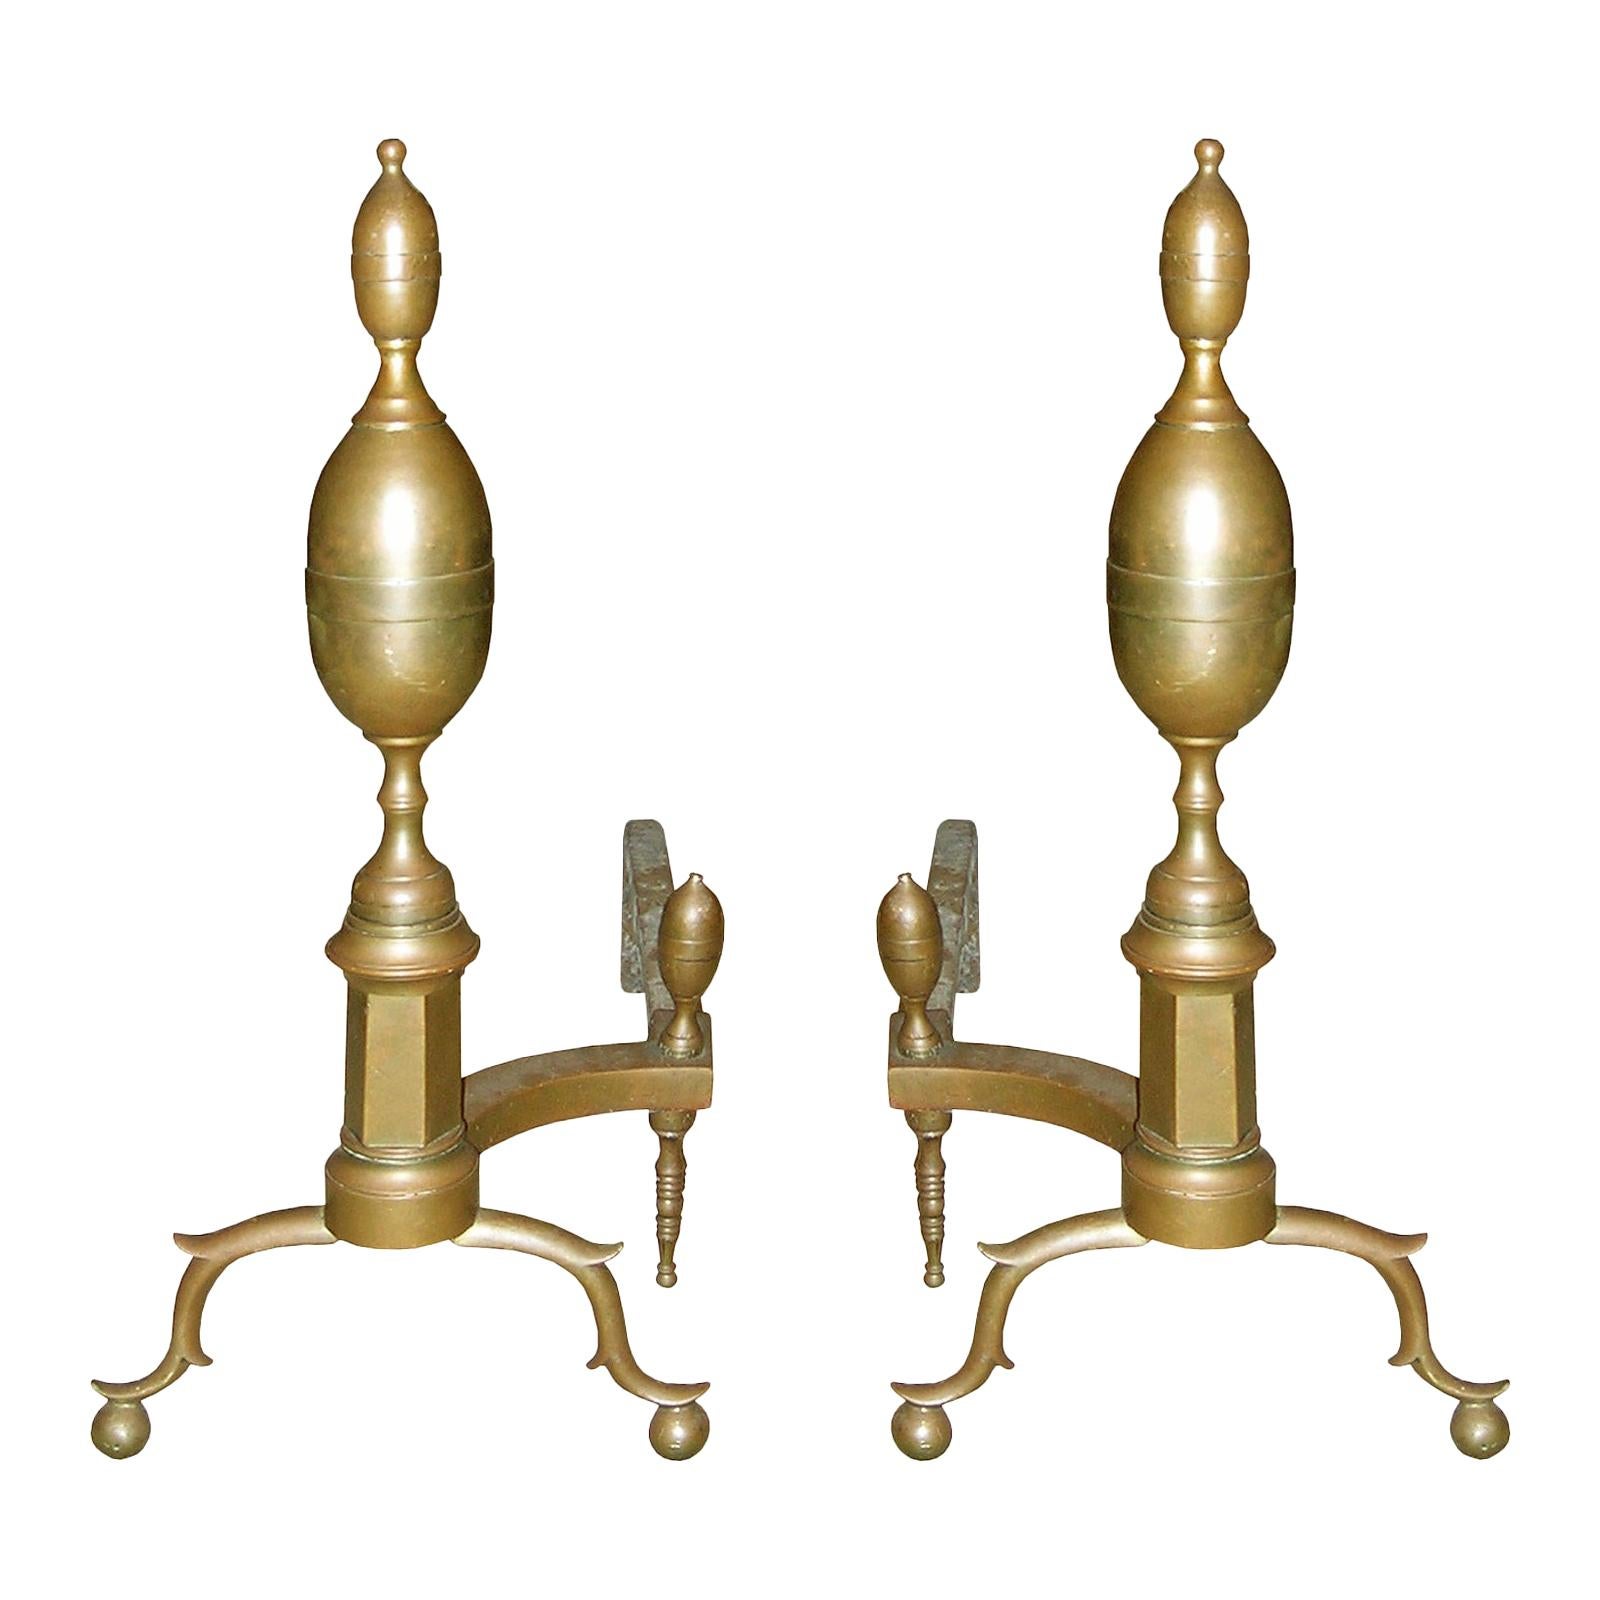 Pair of 19th Century American Brass Andirons, Double Lemon Finial, Trunk